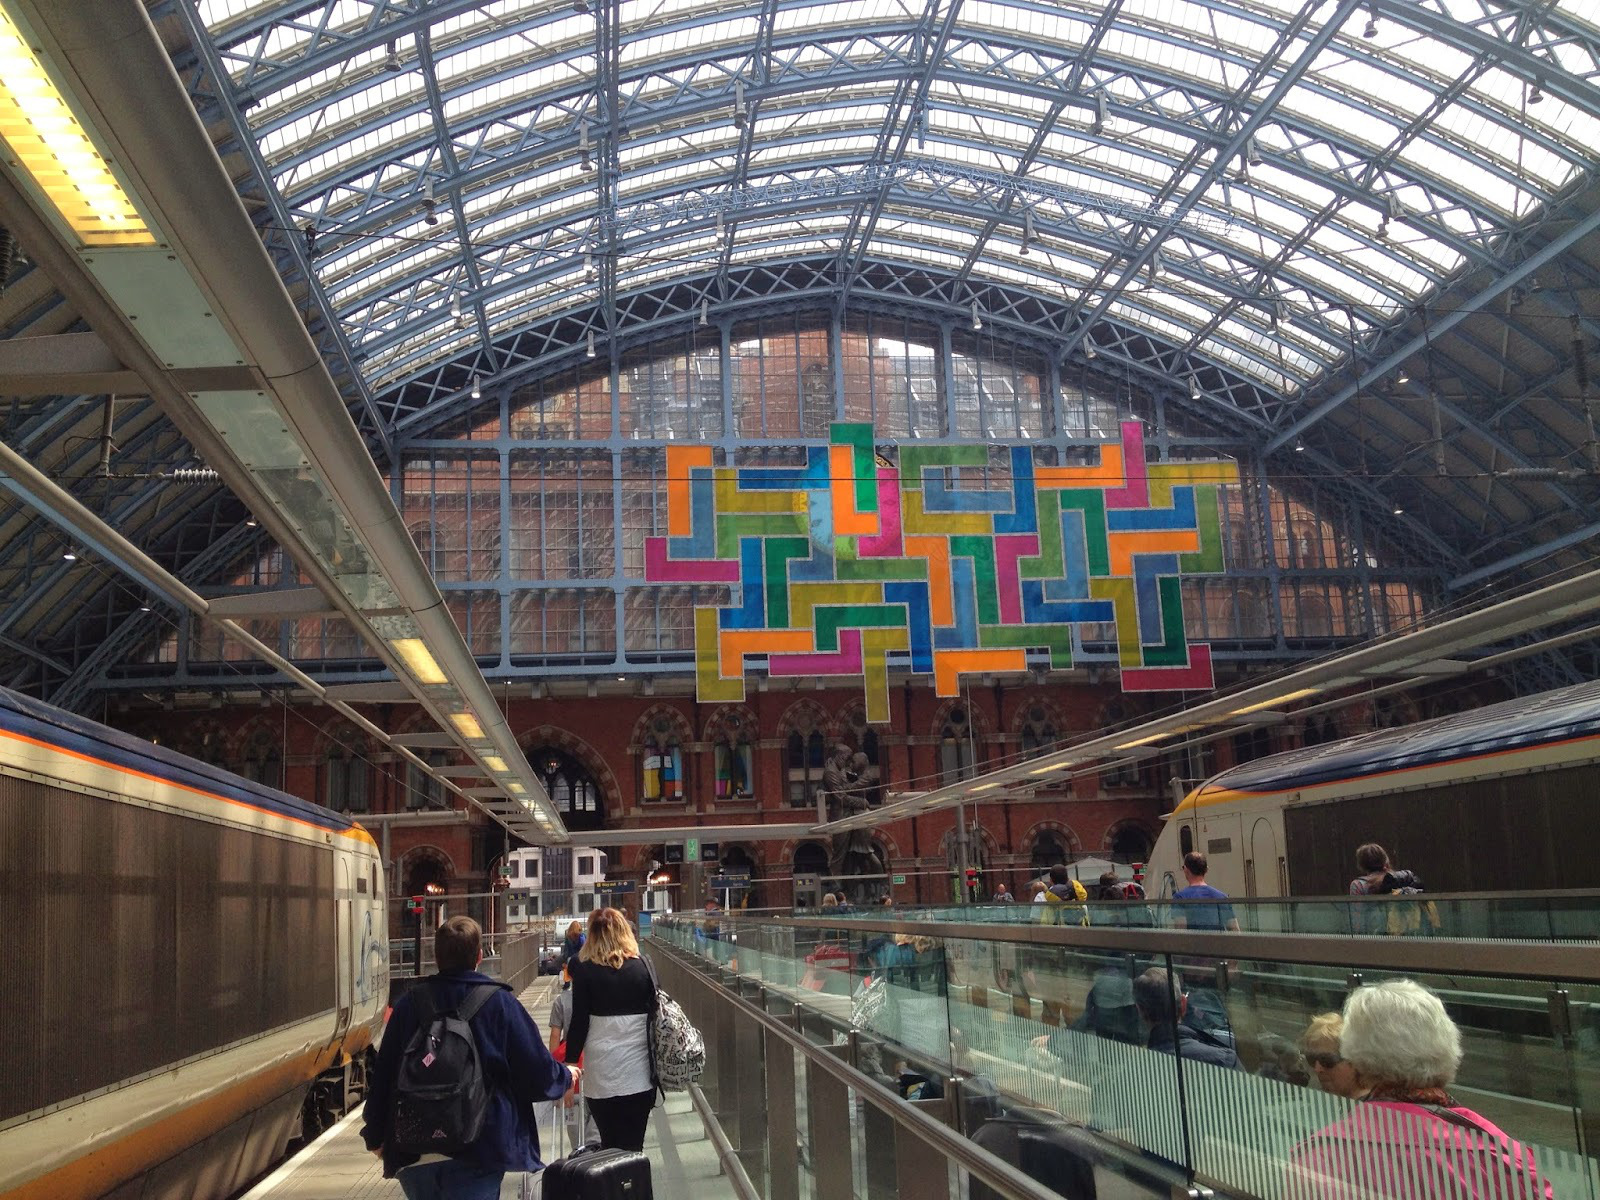 Arrival in St. Pancras Station